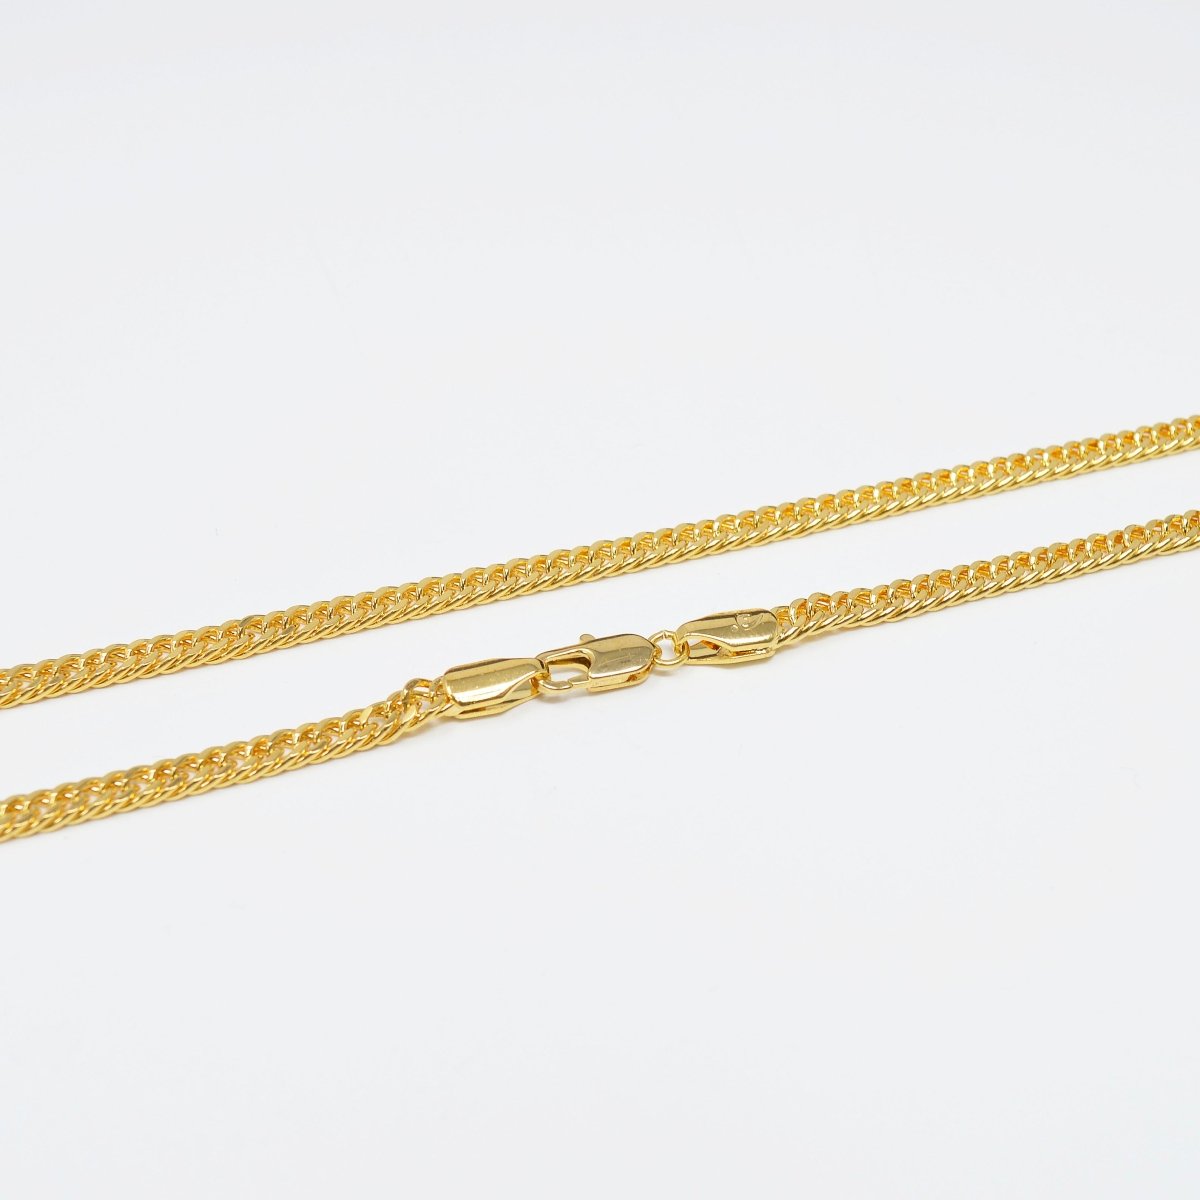 19.8 inch Curb Chain Necklace, 24K Gold Plated Curb Finished Necklace For Jewelry Making, 4mm Curb Necklace w/ Lobster Clasps | CN-993 Clearance Pricing - DLUXCA